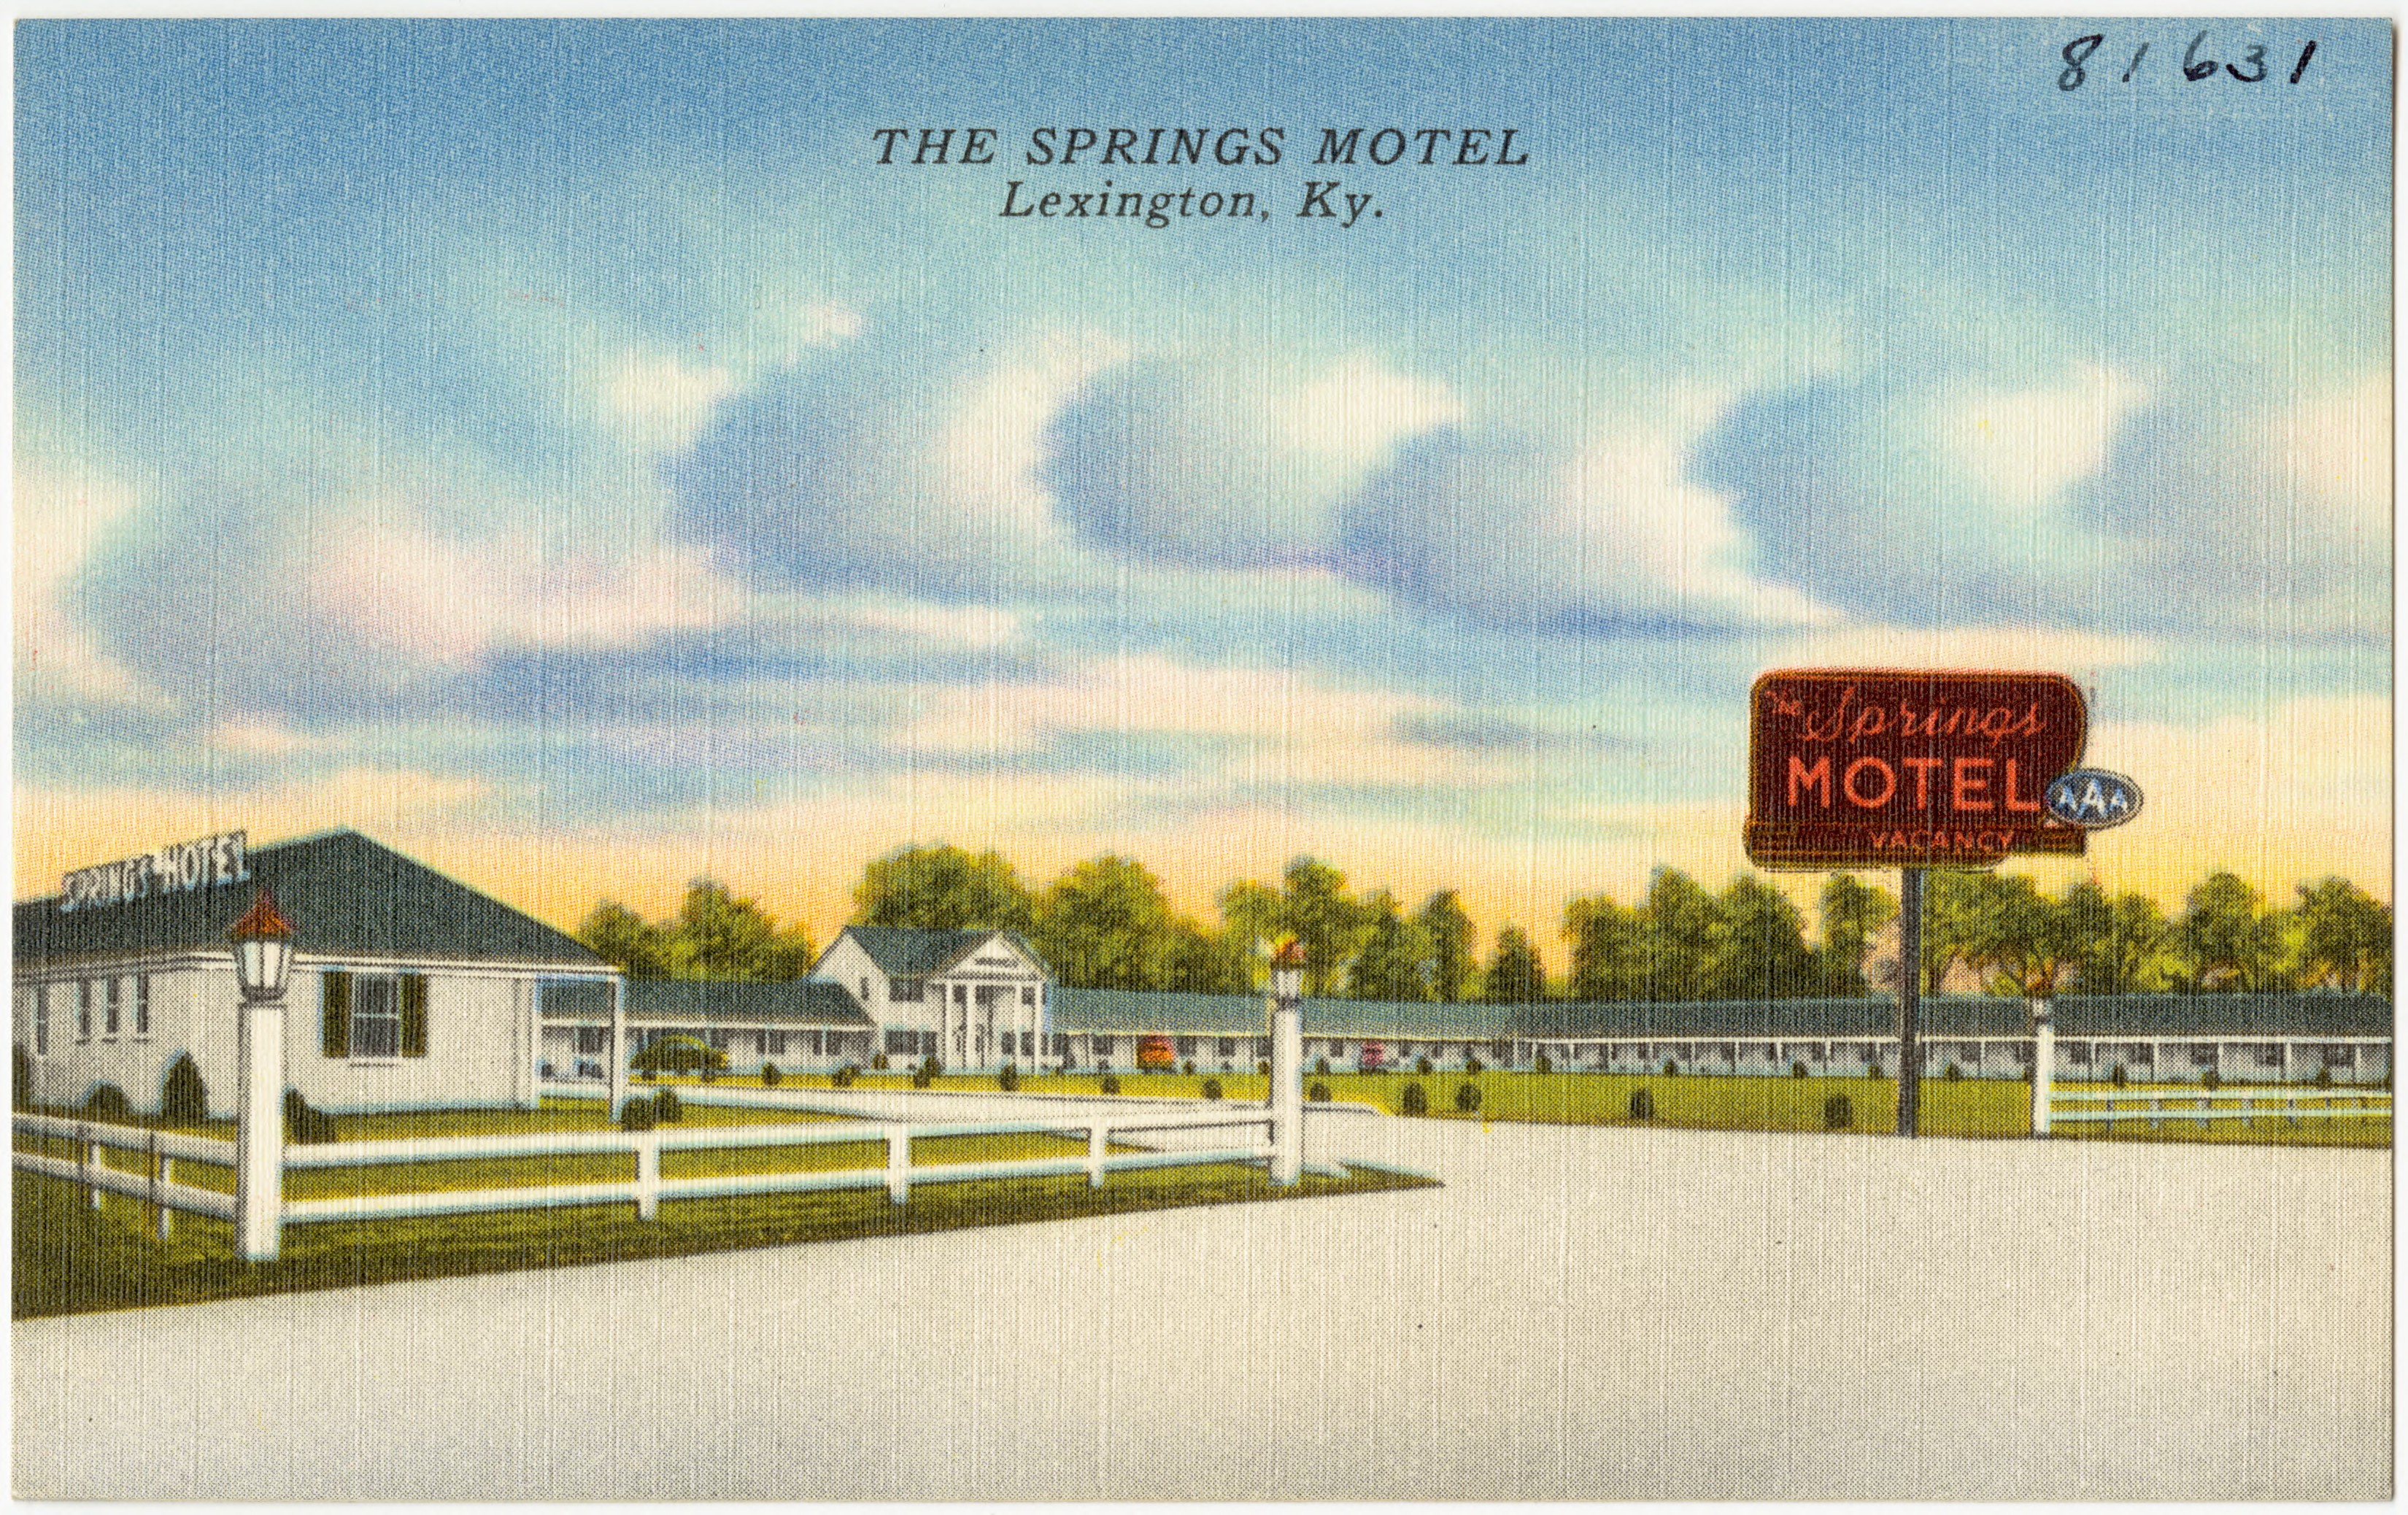 The Springs Motel, the largest finest in the South, one mile south of Lexin...